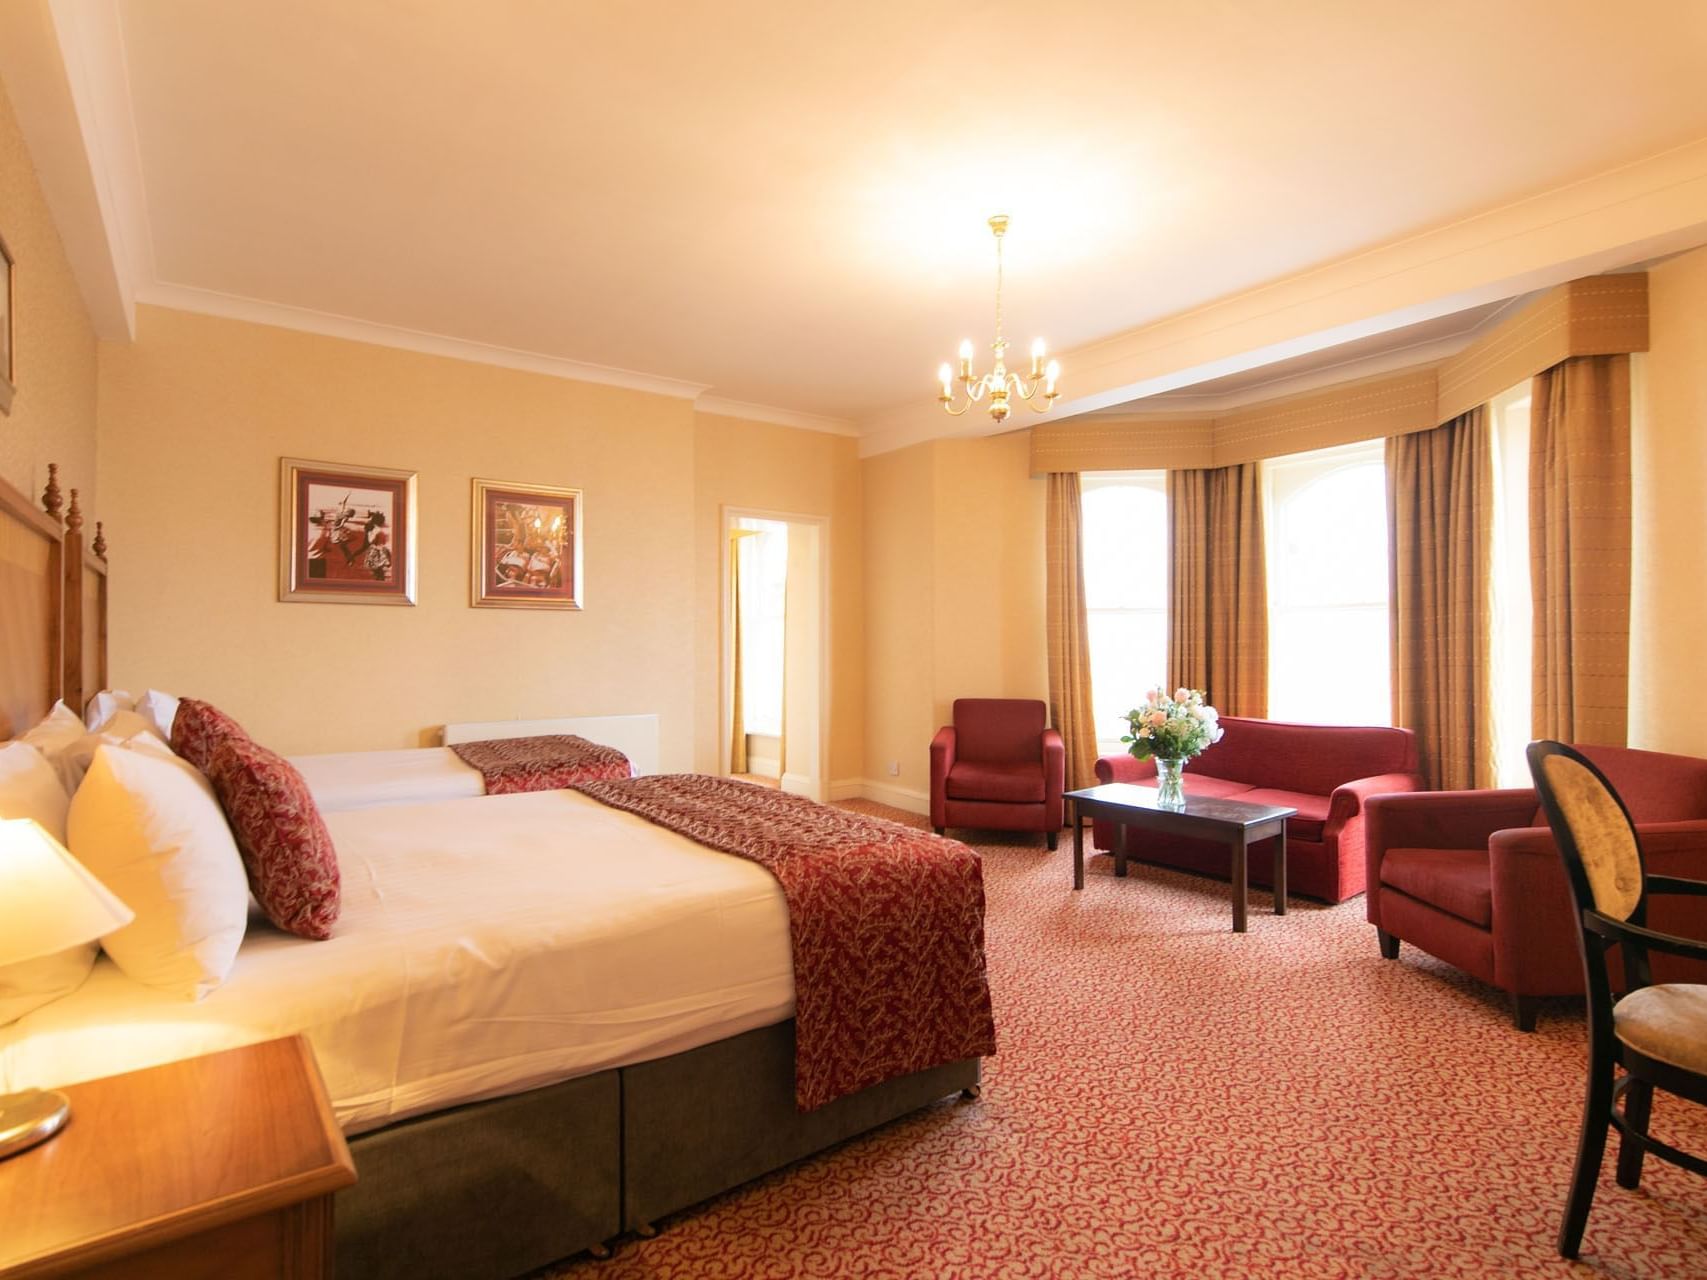 Beds & sofa, Premium Family Rooms, The Imperial Hotel Blackpool